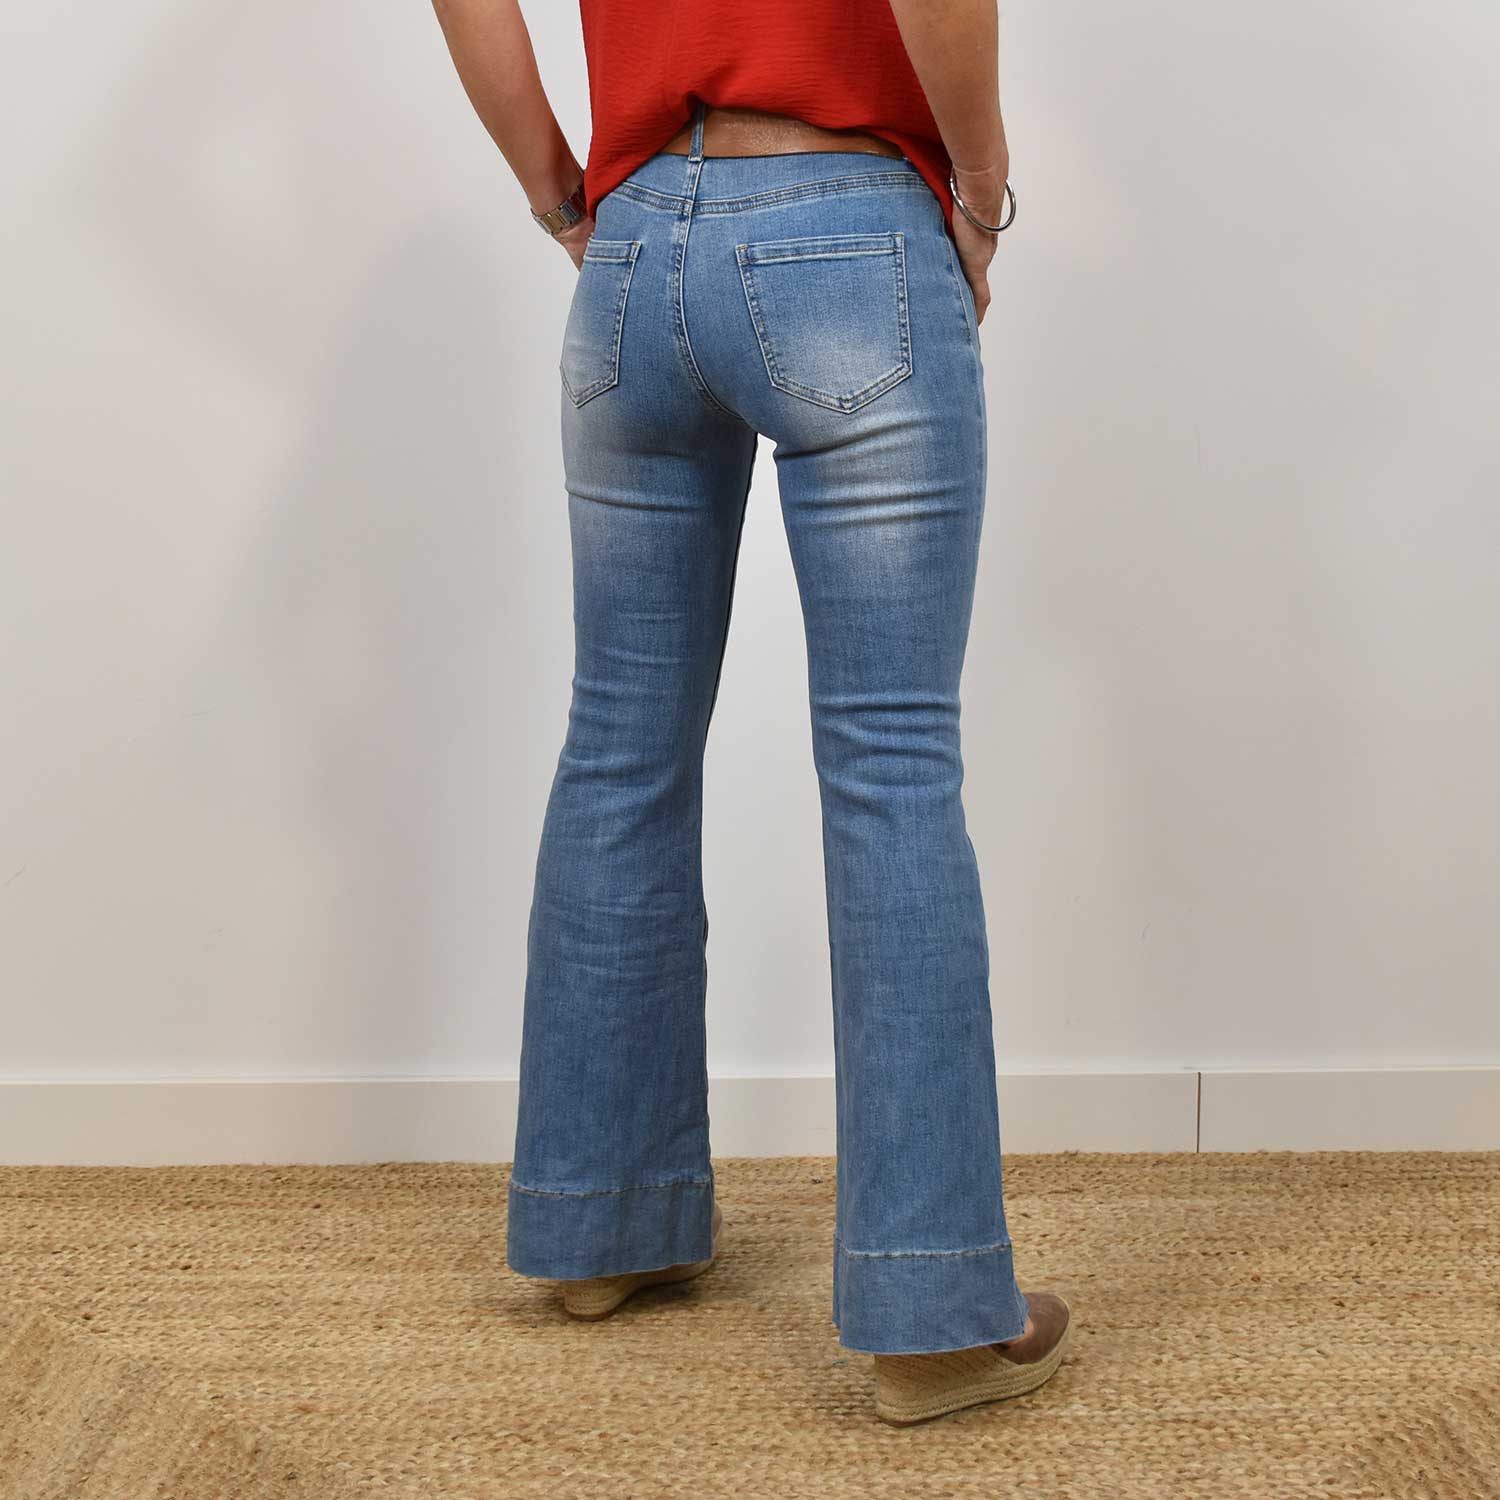 Pockets flared jeans